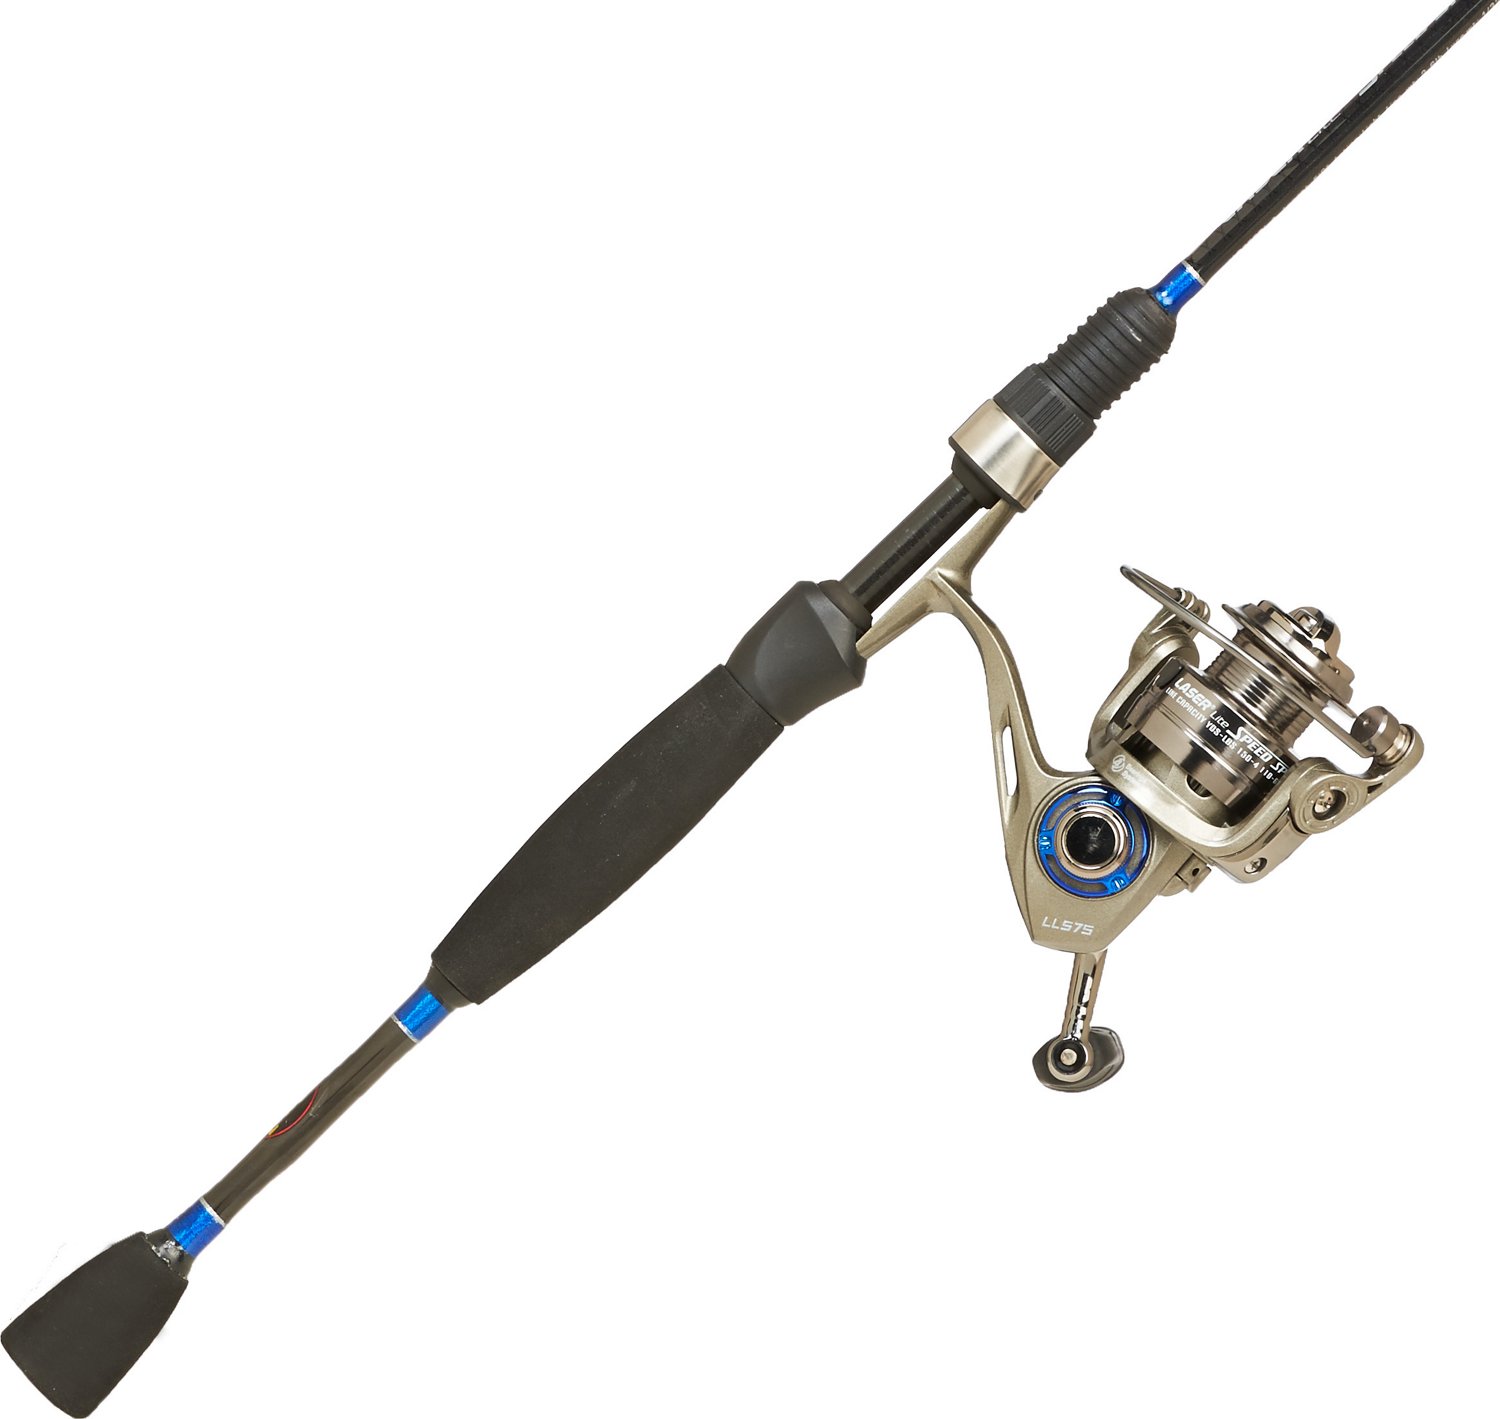 Lew's Lite Speed 5' 6 Ultra Lite Spinning Fishing Rod and Reel Combo